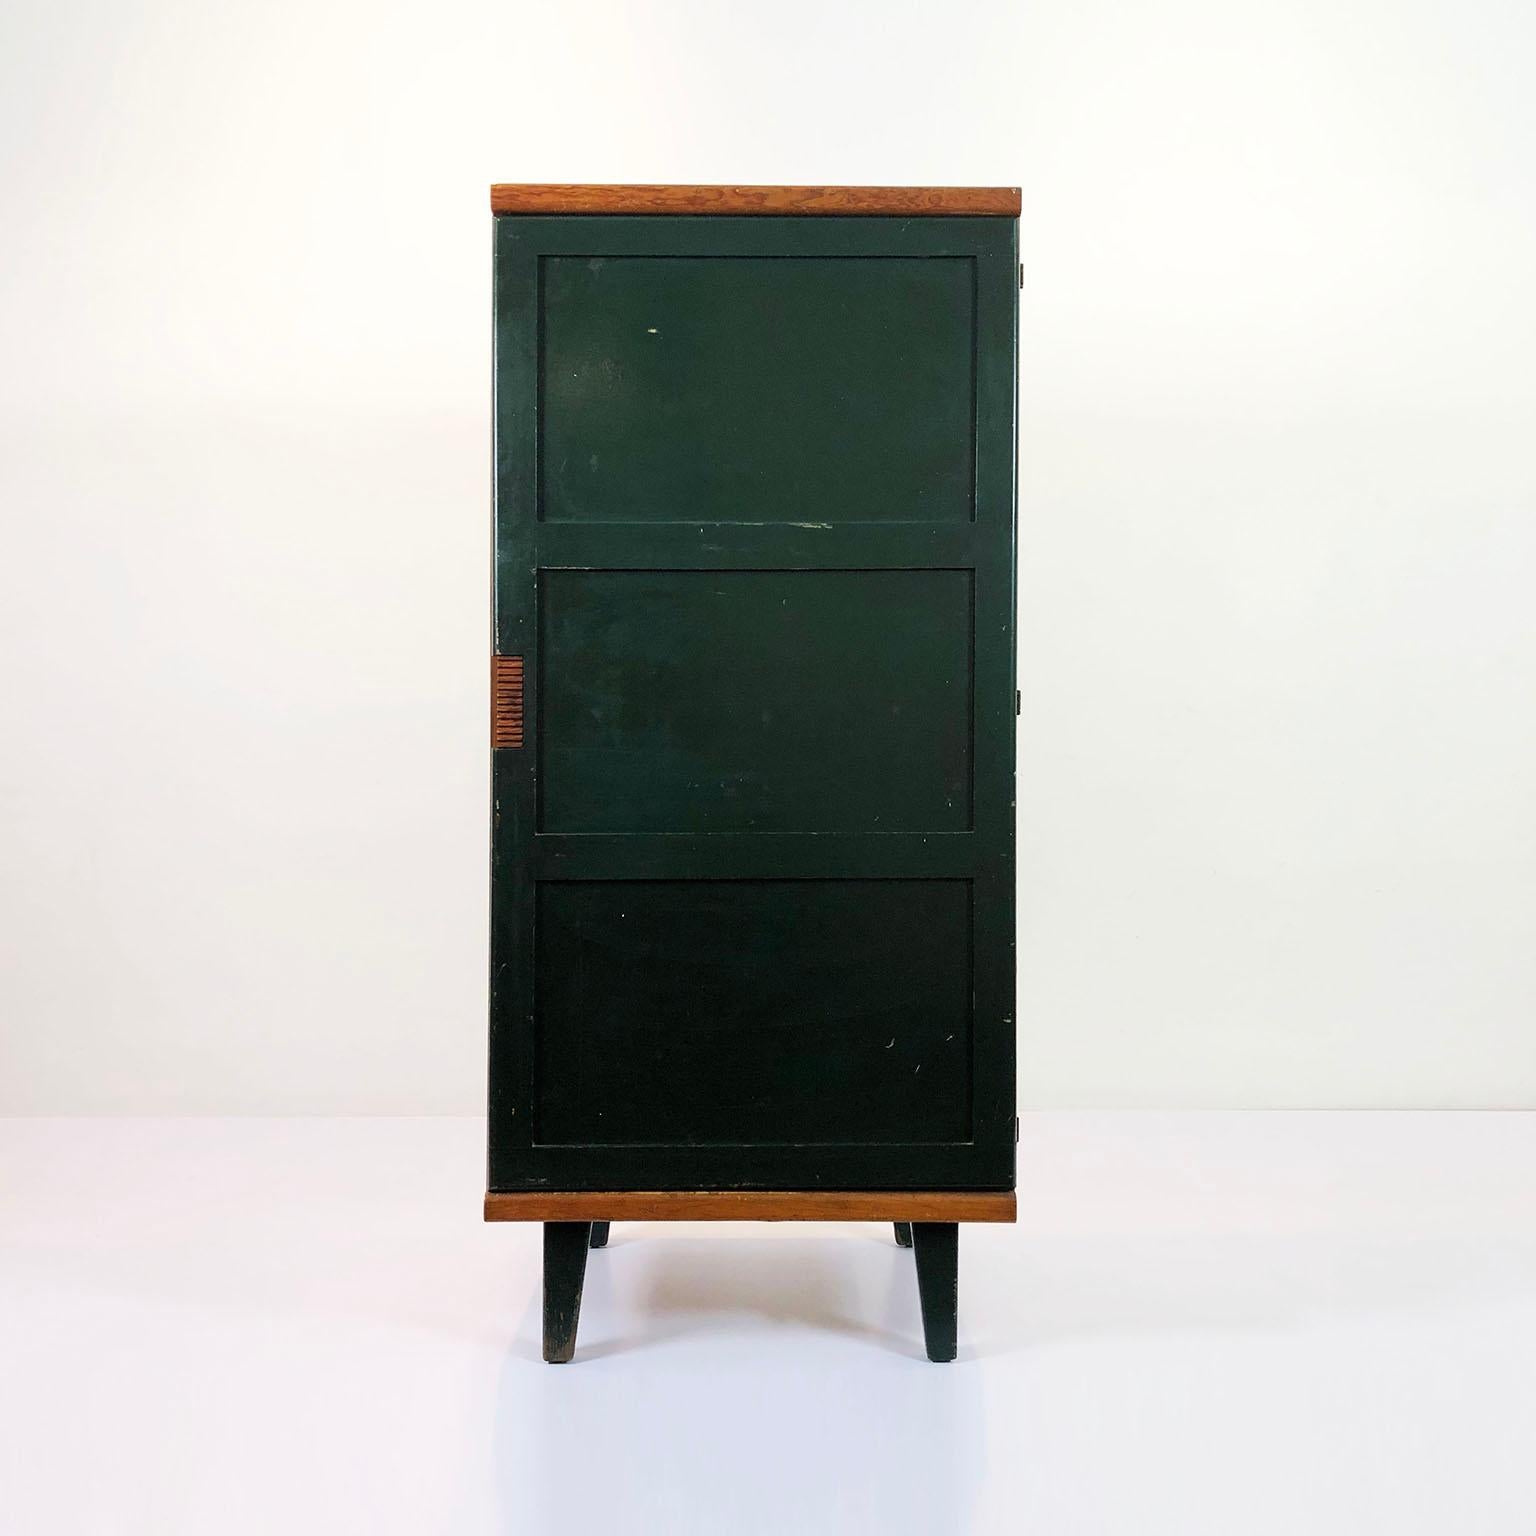 We offer this rare Wardrobe designed by Michael Van Beuren for the 